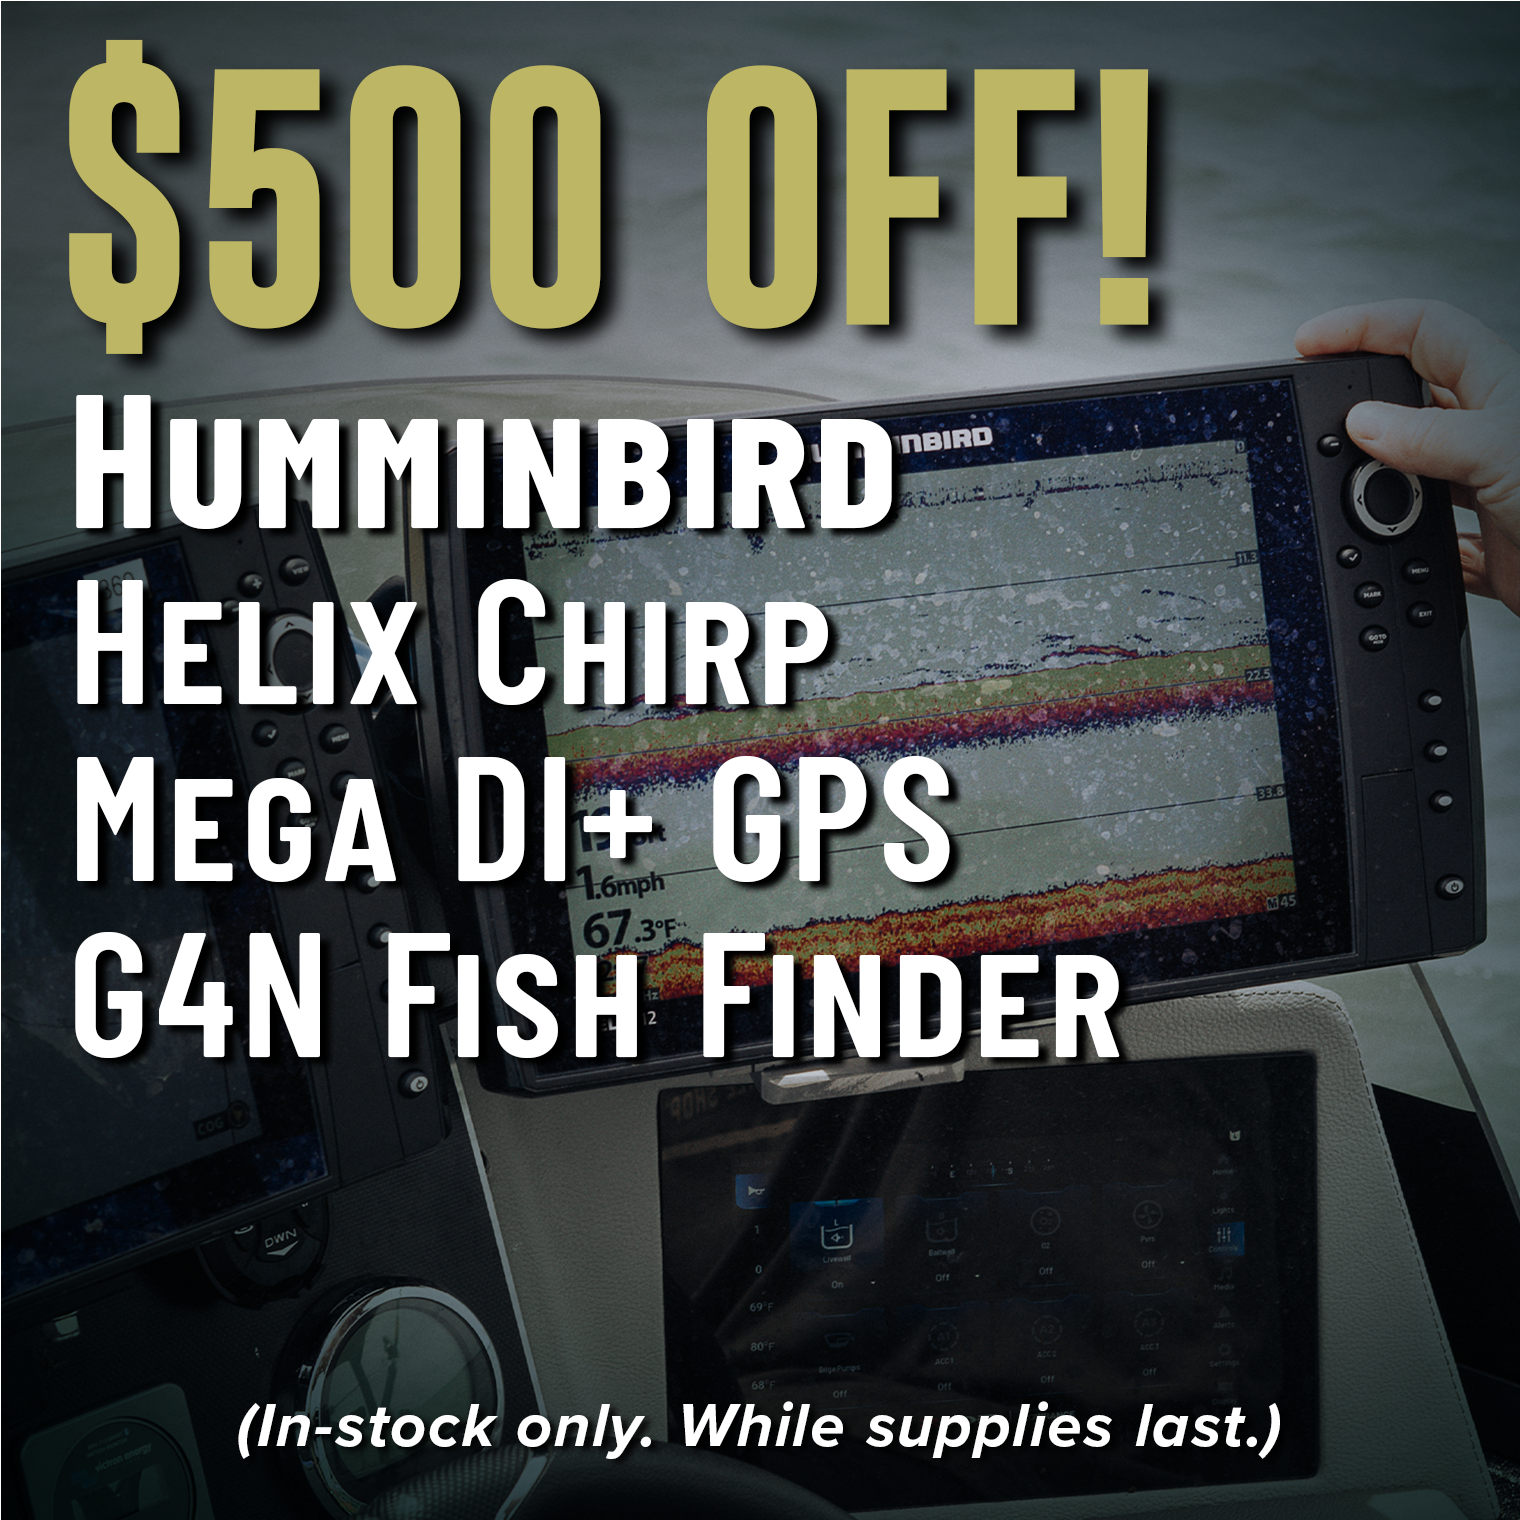 $500 Off! Humminbird Helix Chirp Mega DI+ GPS G4N Fish Finder (In-stock only. While supplies last.)